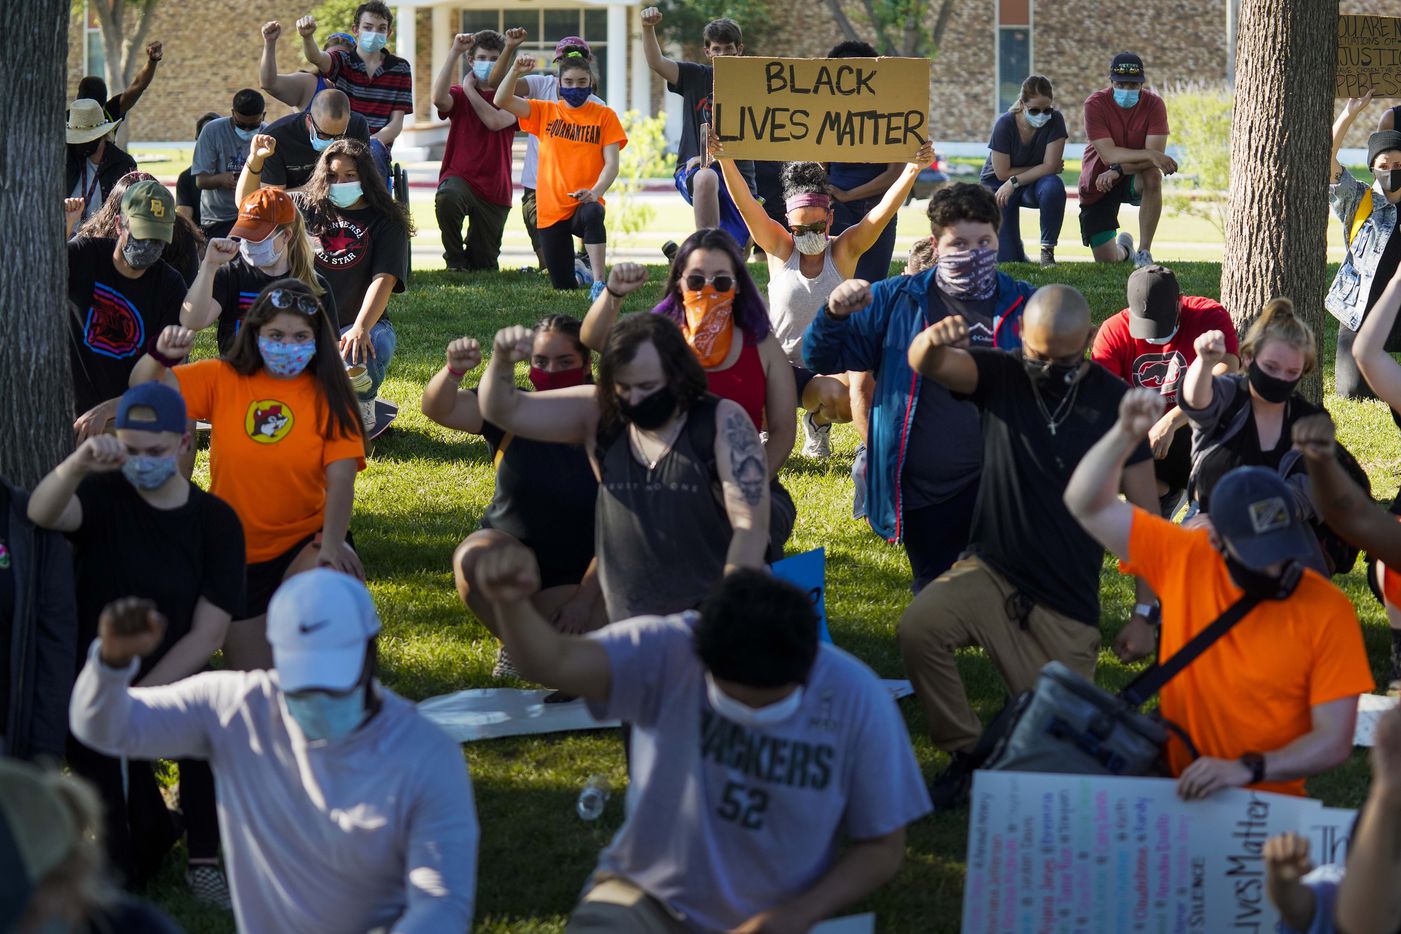 Demonstrators take a knee for 8 minutes and 46 seconds during a protest organized by Berkner High School students at Berner Park as protests continue after the death of George Floyd on Wednesday, June 3, 2020, in Richardson. (Smiley N. Pool/The Dallas Morning News)